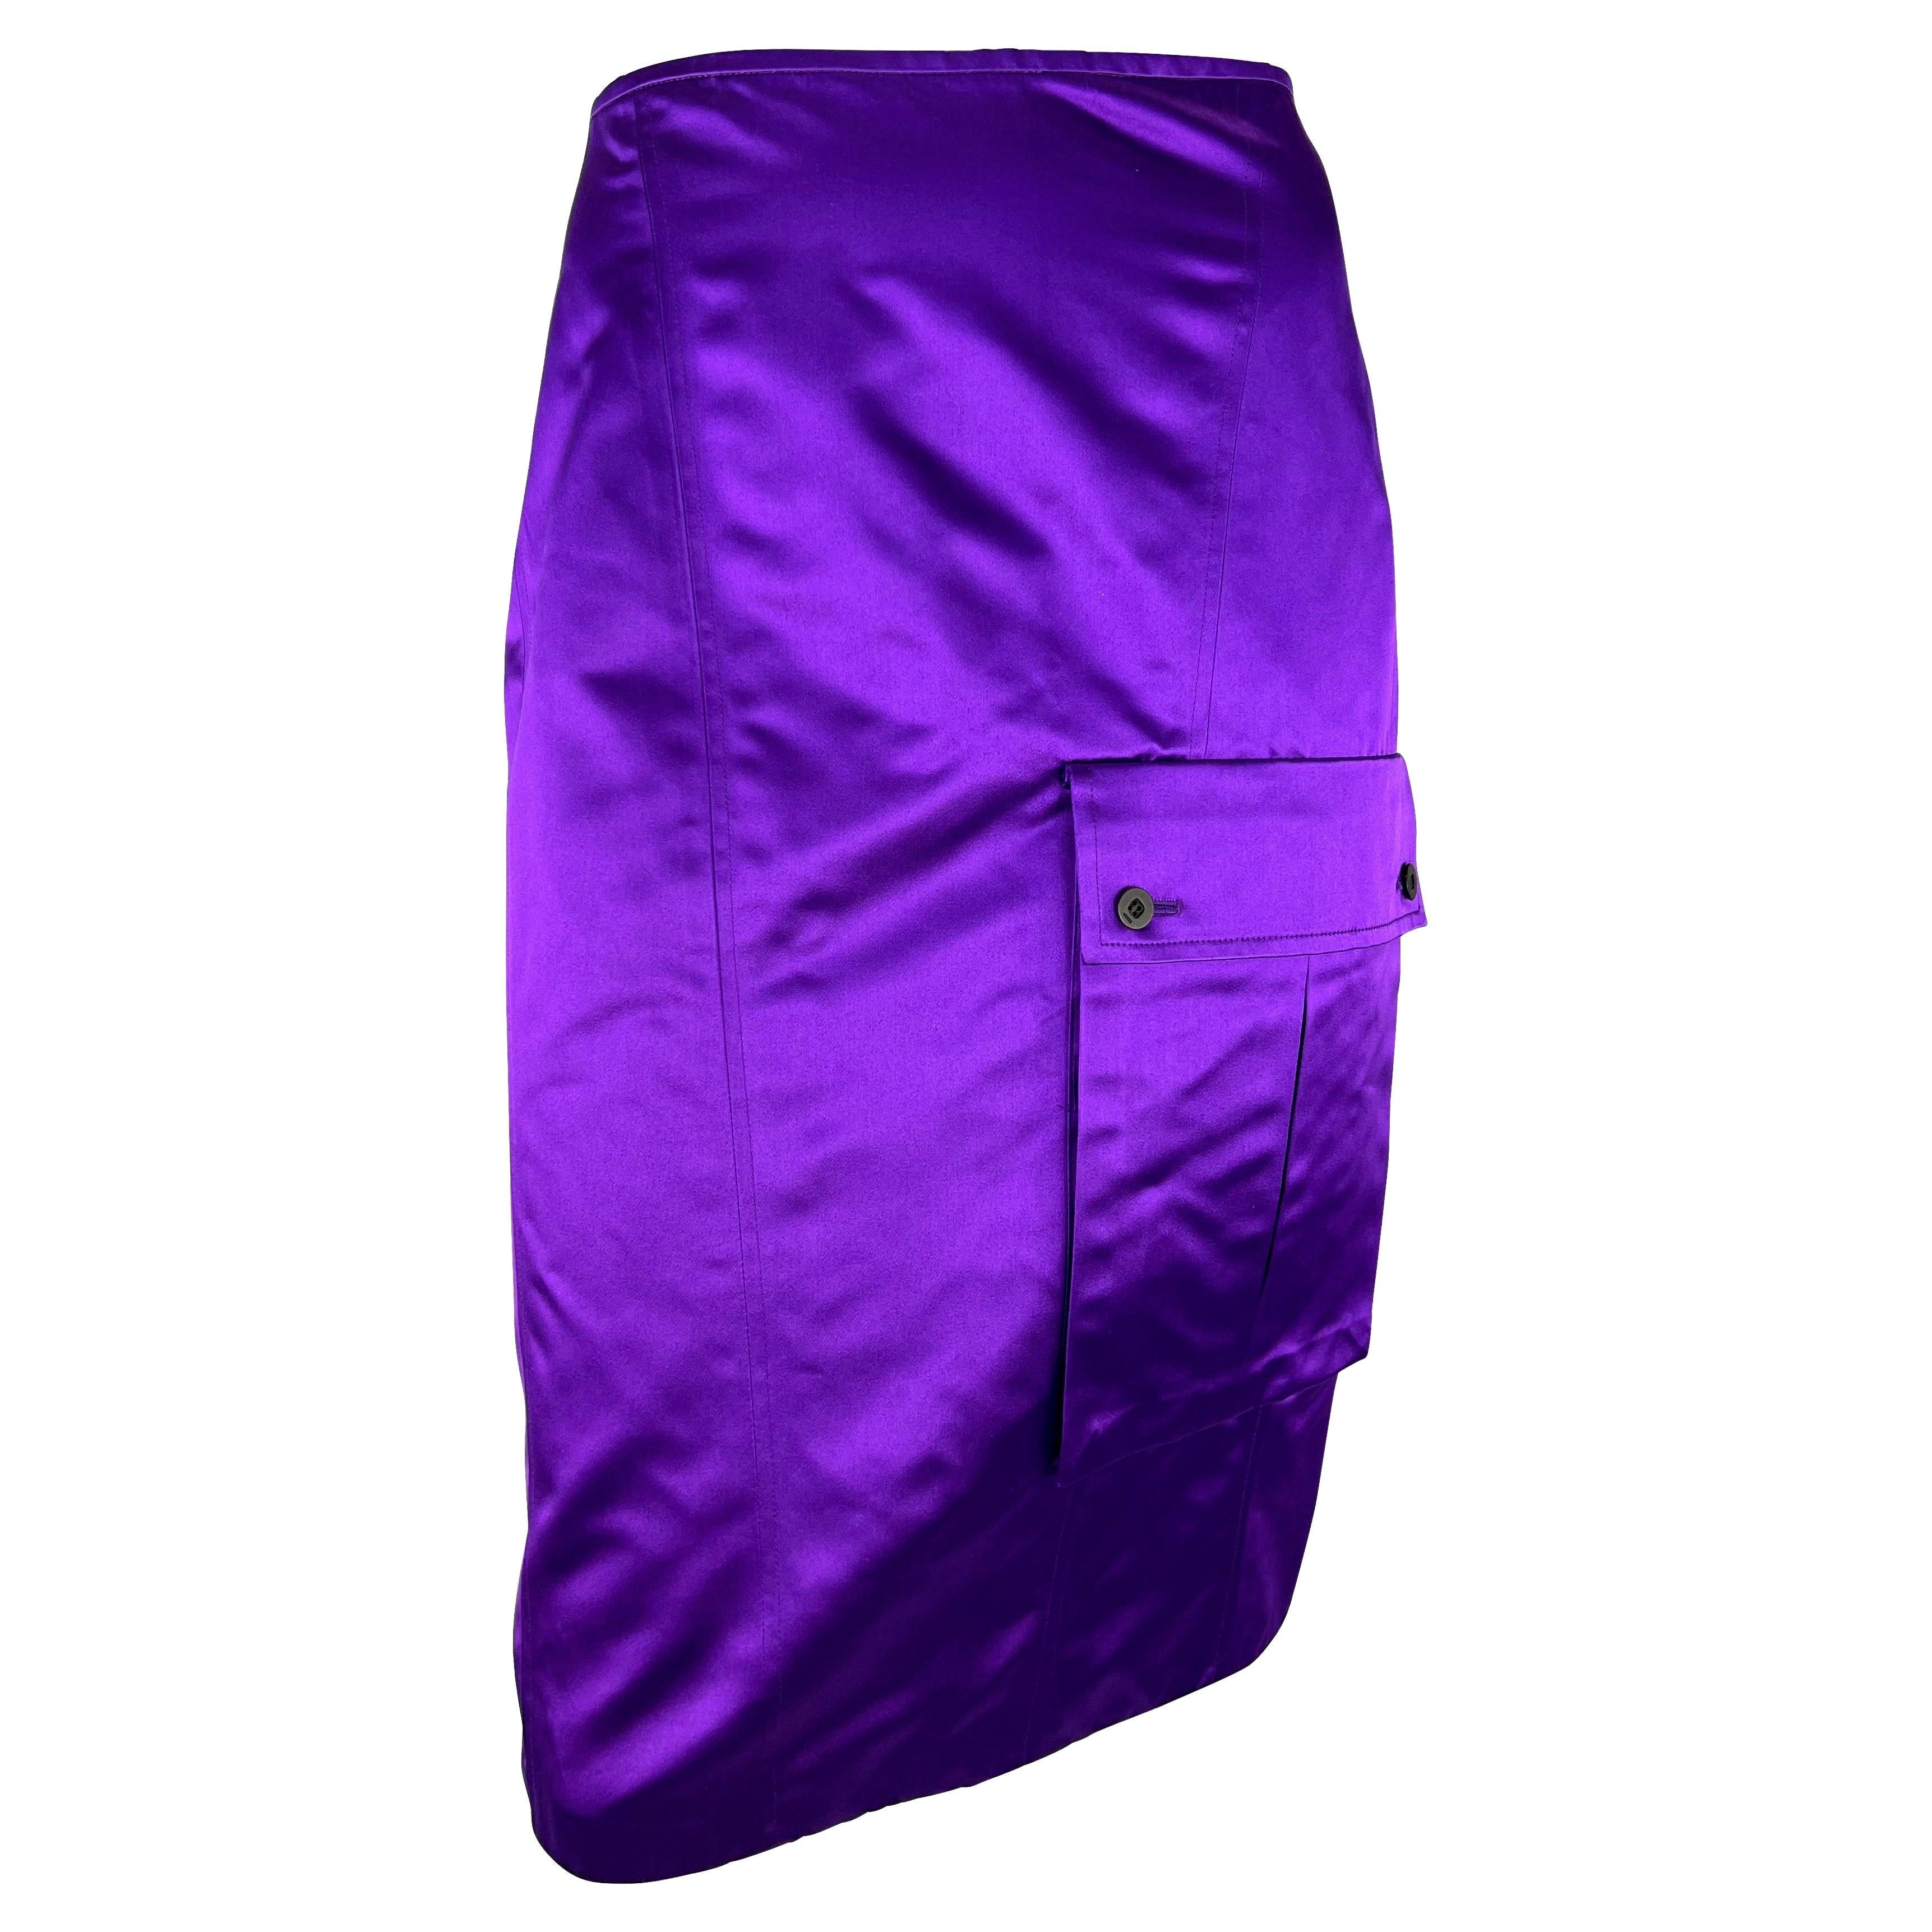 S/S 2001 Gucci by Tom Ford Runway Purple Satin Cargo Pocket Pencil Skirt For Sale